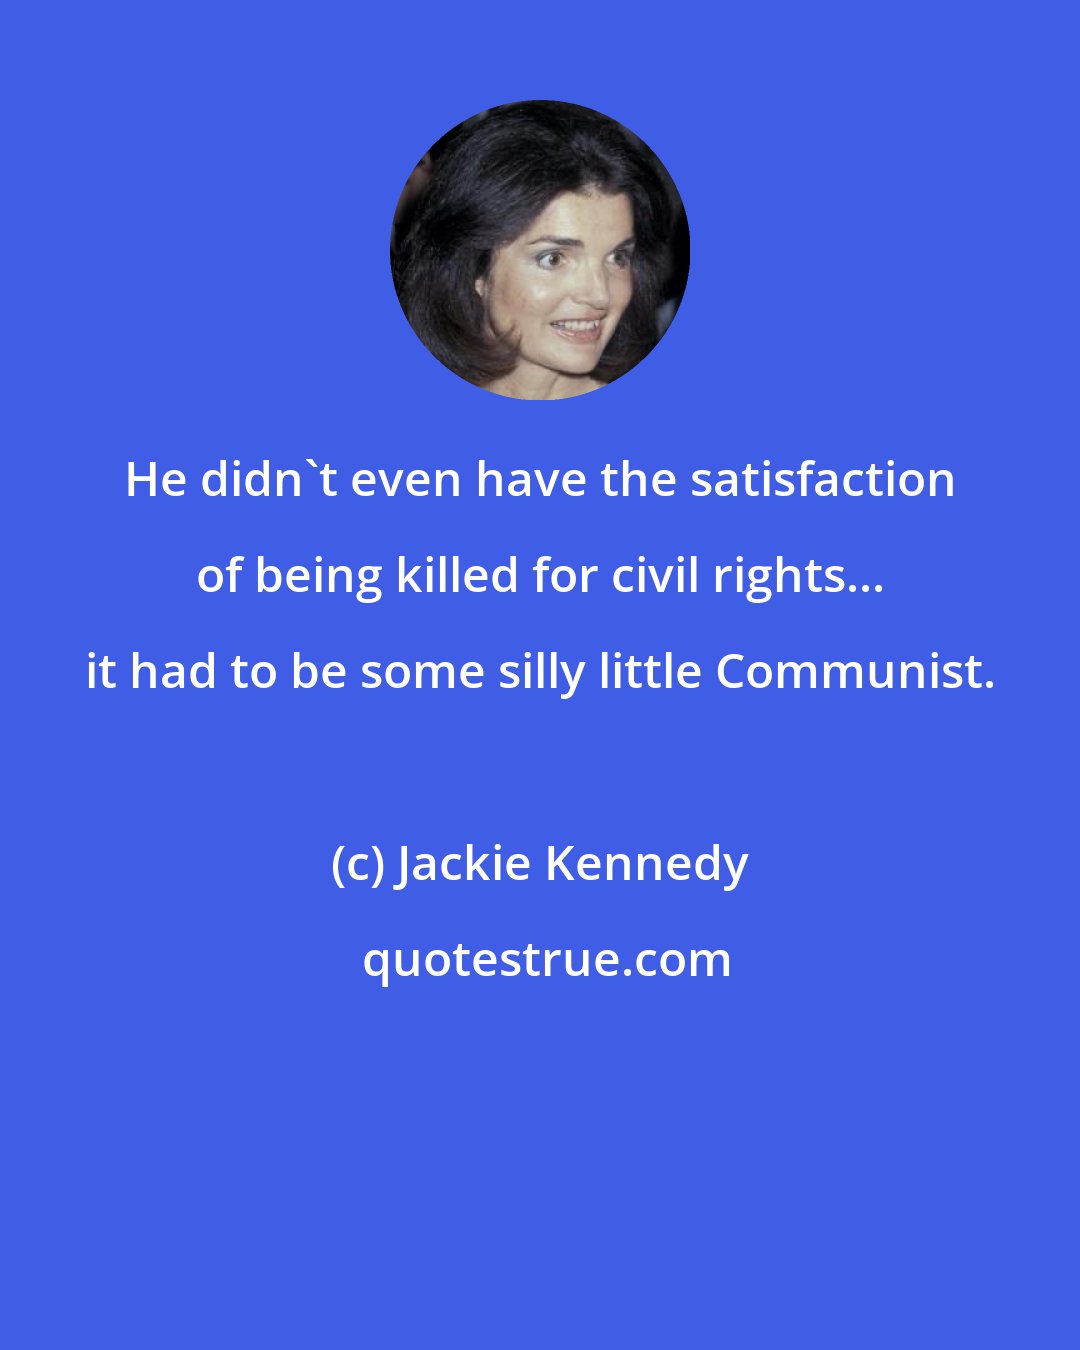 Jackie Kennedy: He didn't even have the satisfaction of being killed for civil rights... it had to be some silly little Communist.